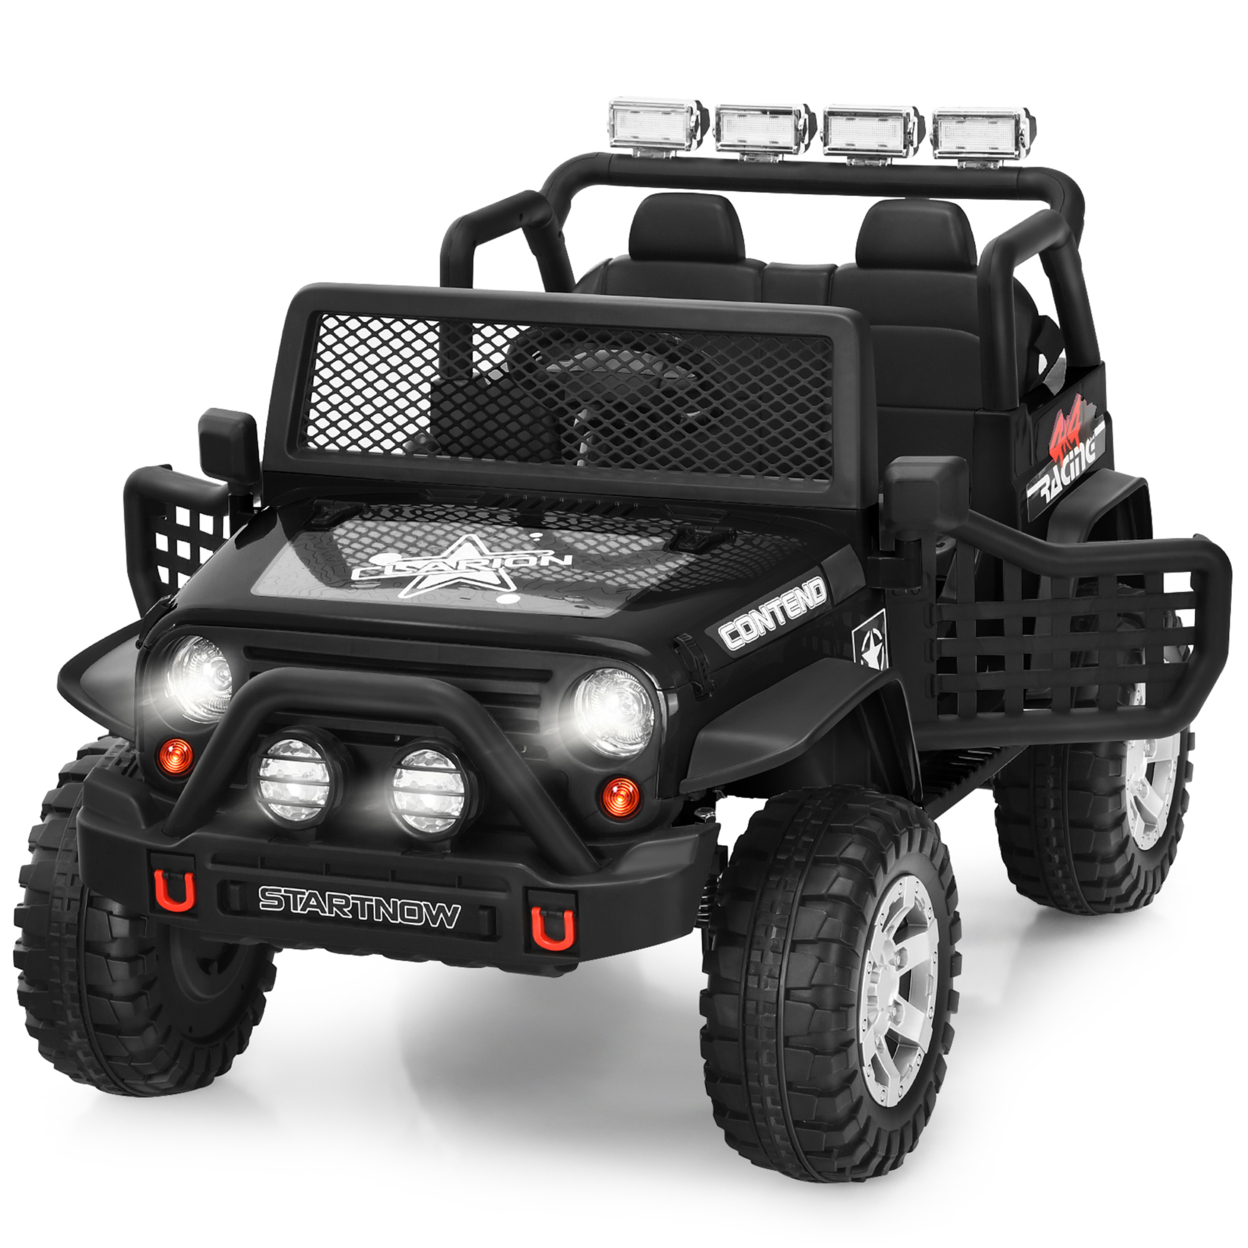 12V Electric Kids Ride On Car Truck W/ MP3 Horn 2.4G Remote Control - Black